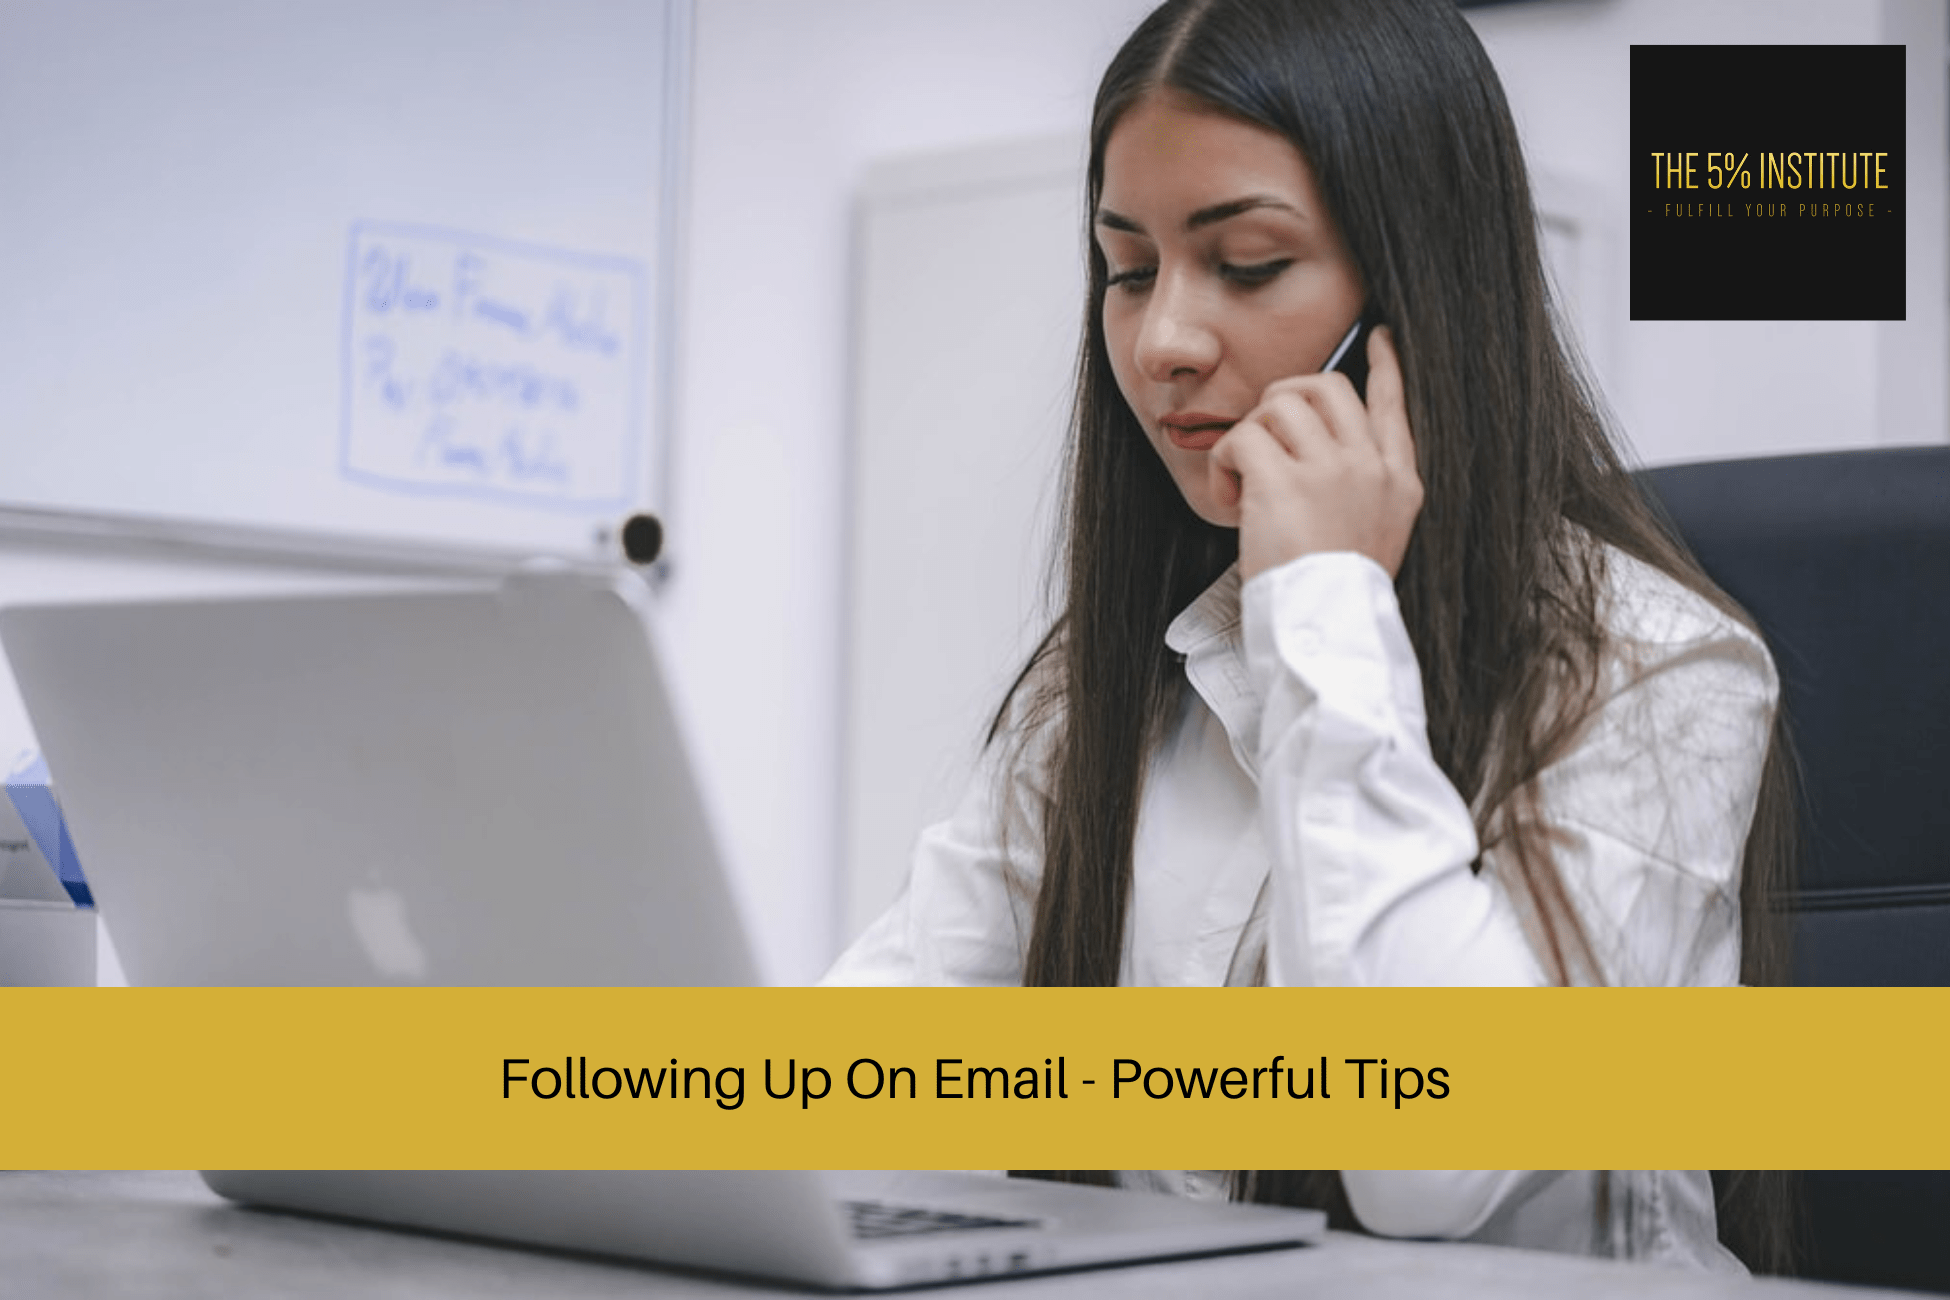 Following Up On Email - Powerful Tips